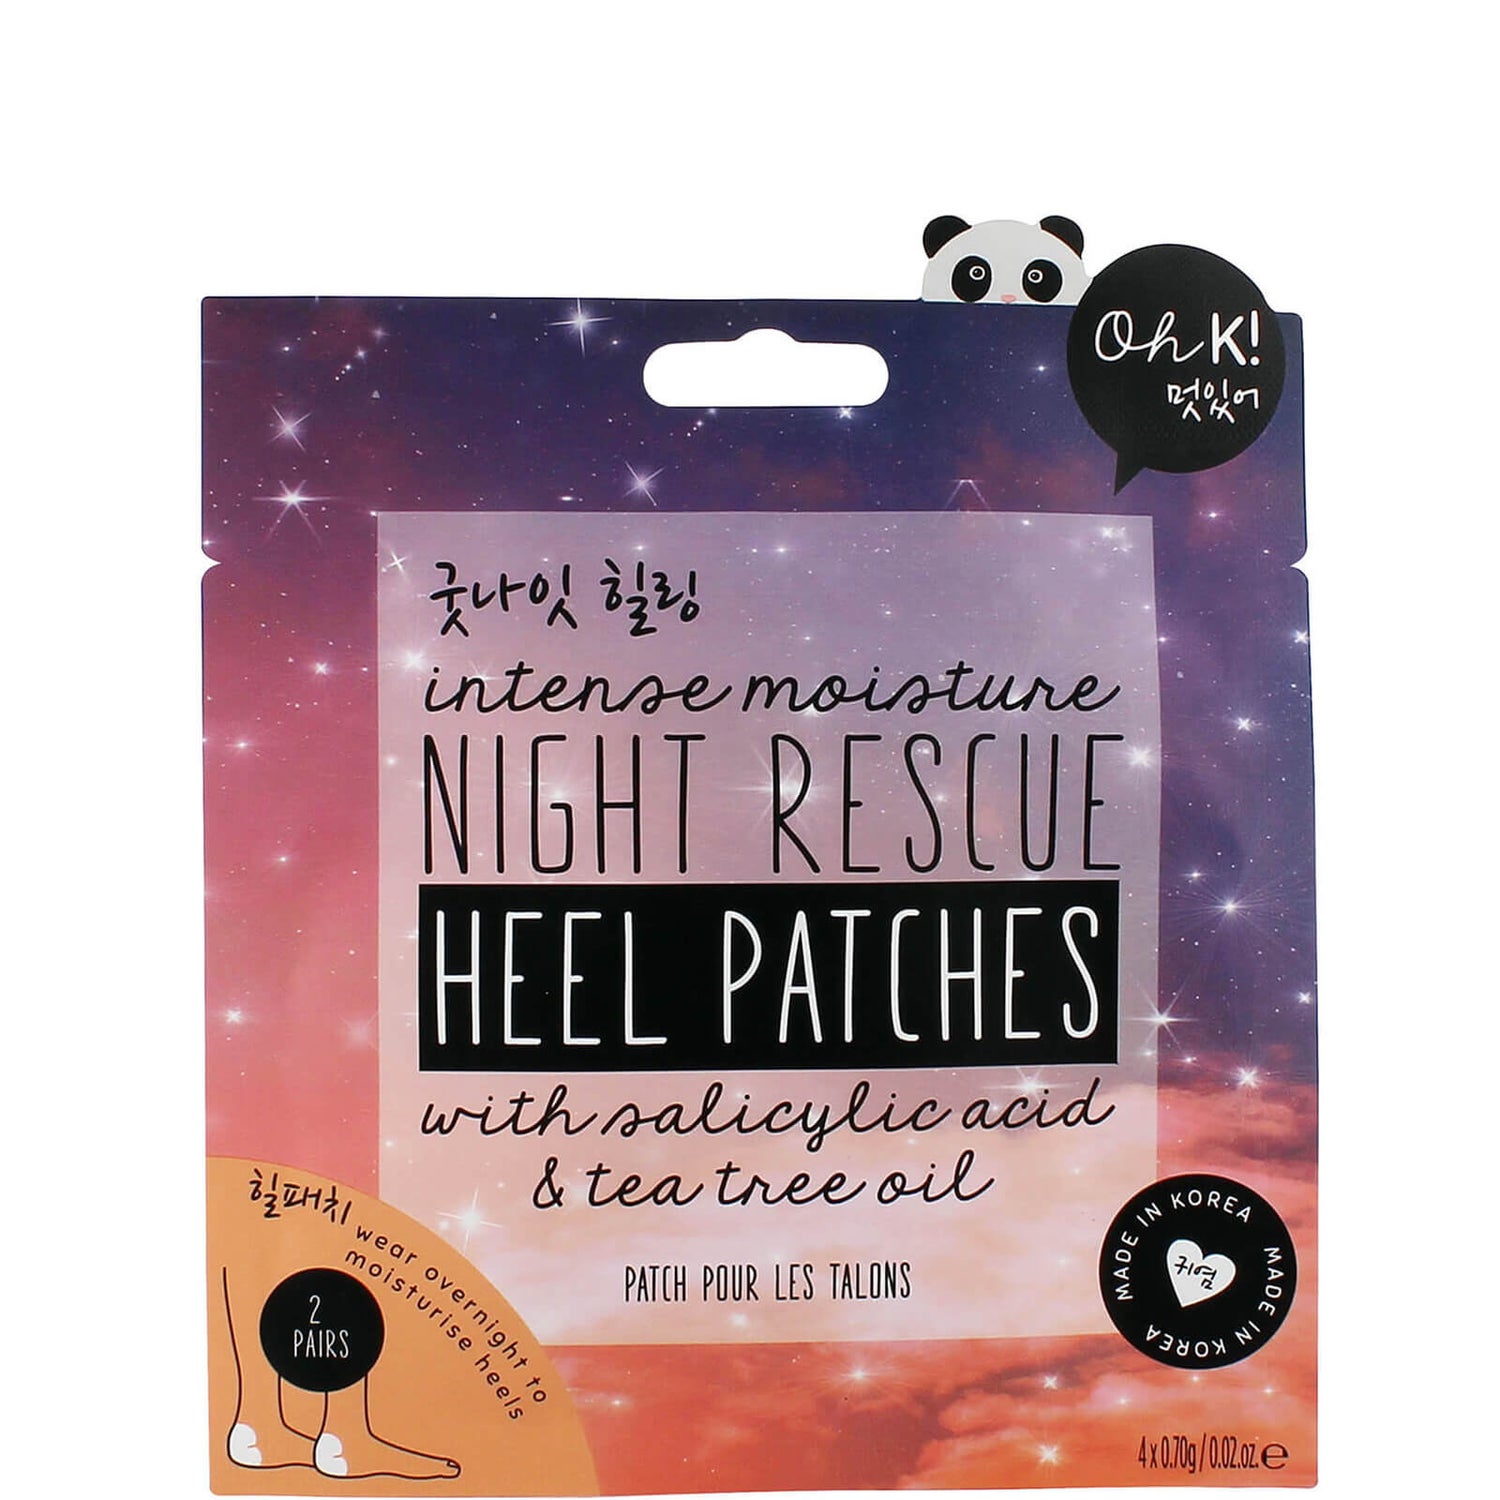 Oh K! Intense Moisture Night Rescue Heel Patches